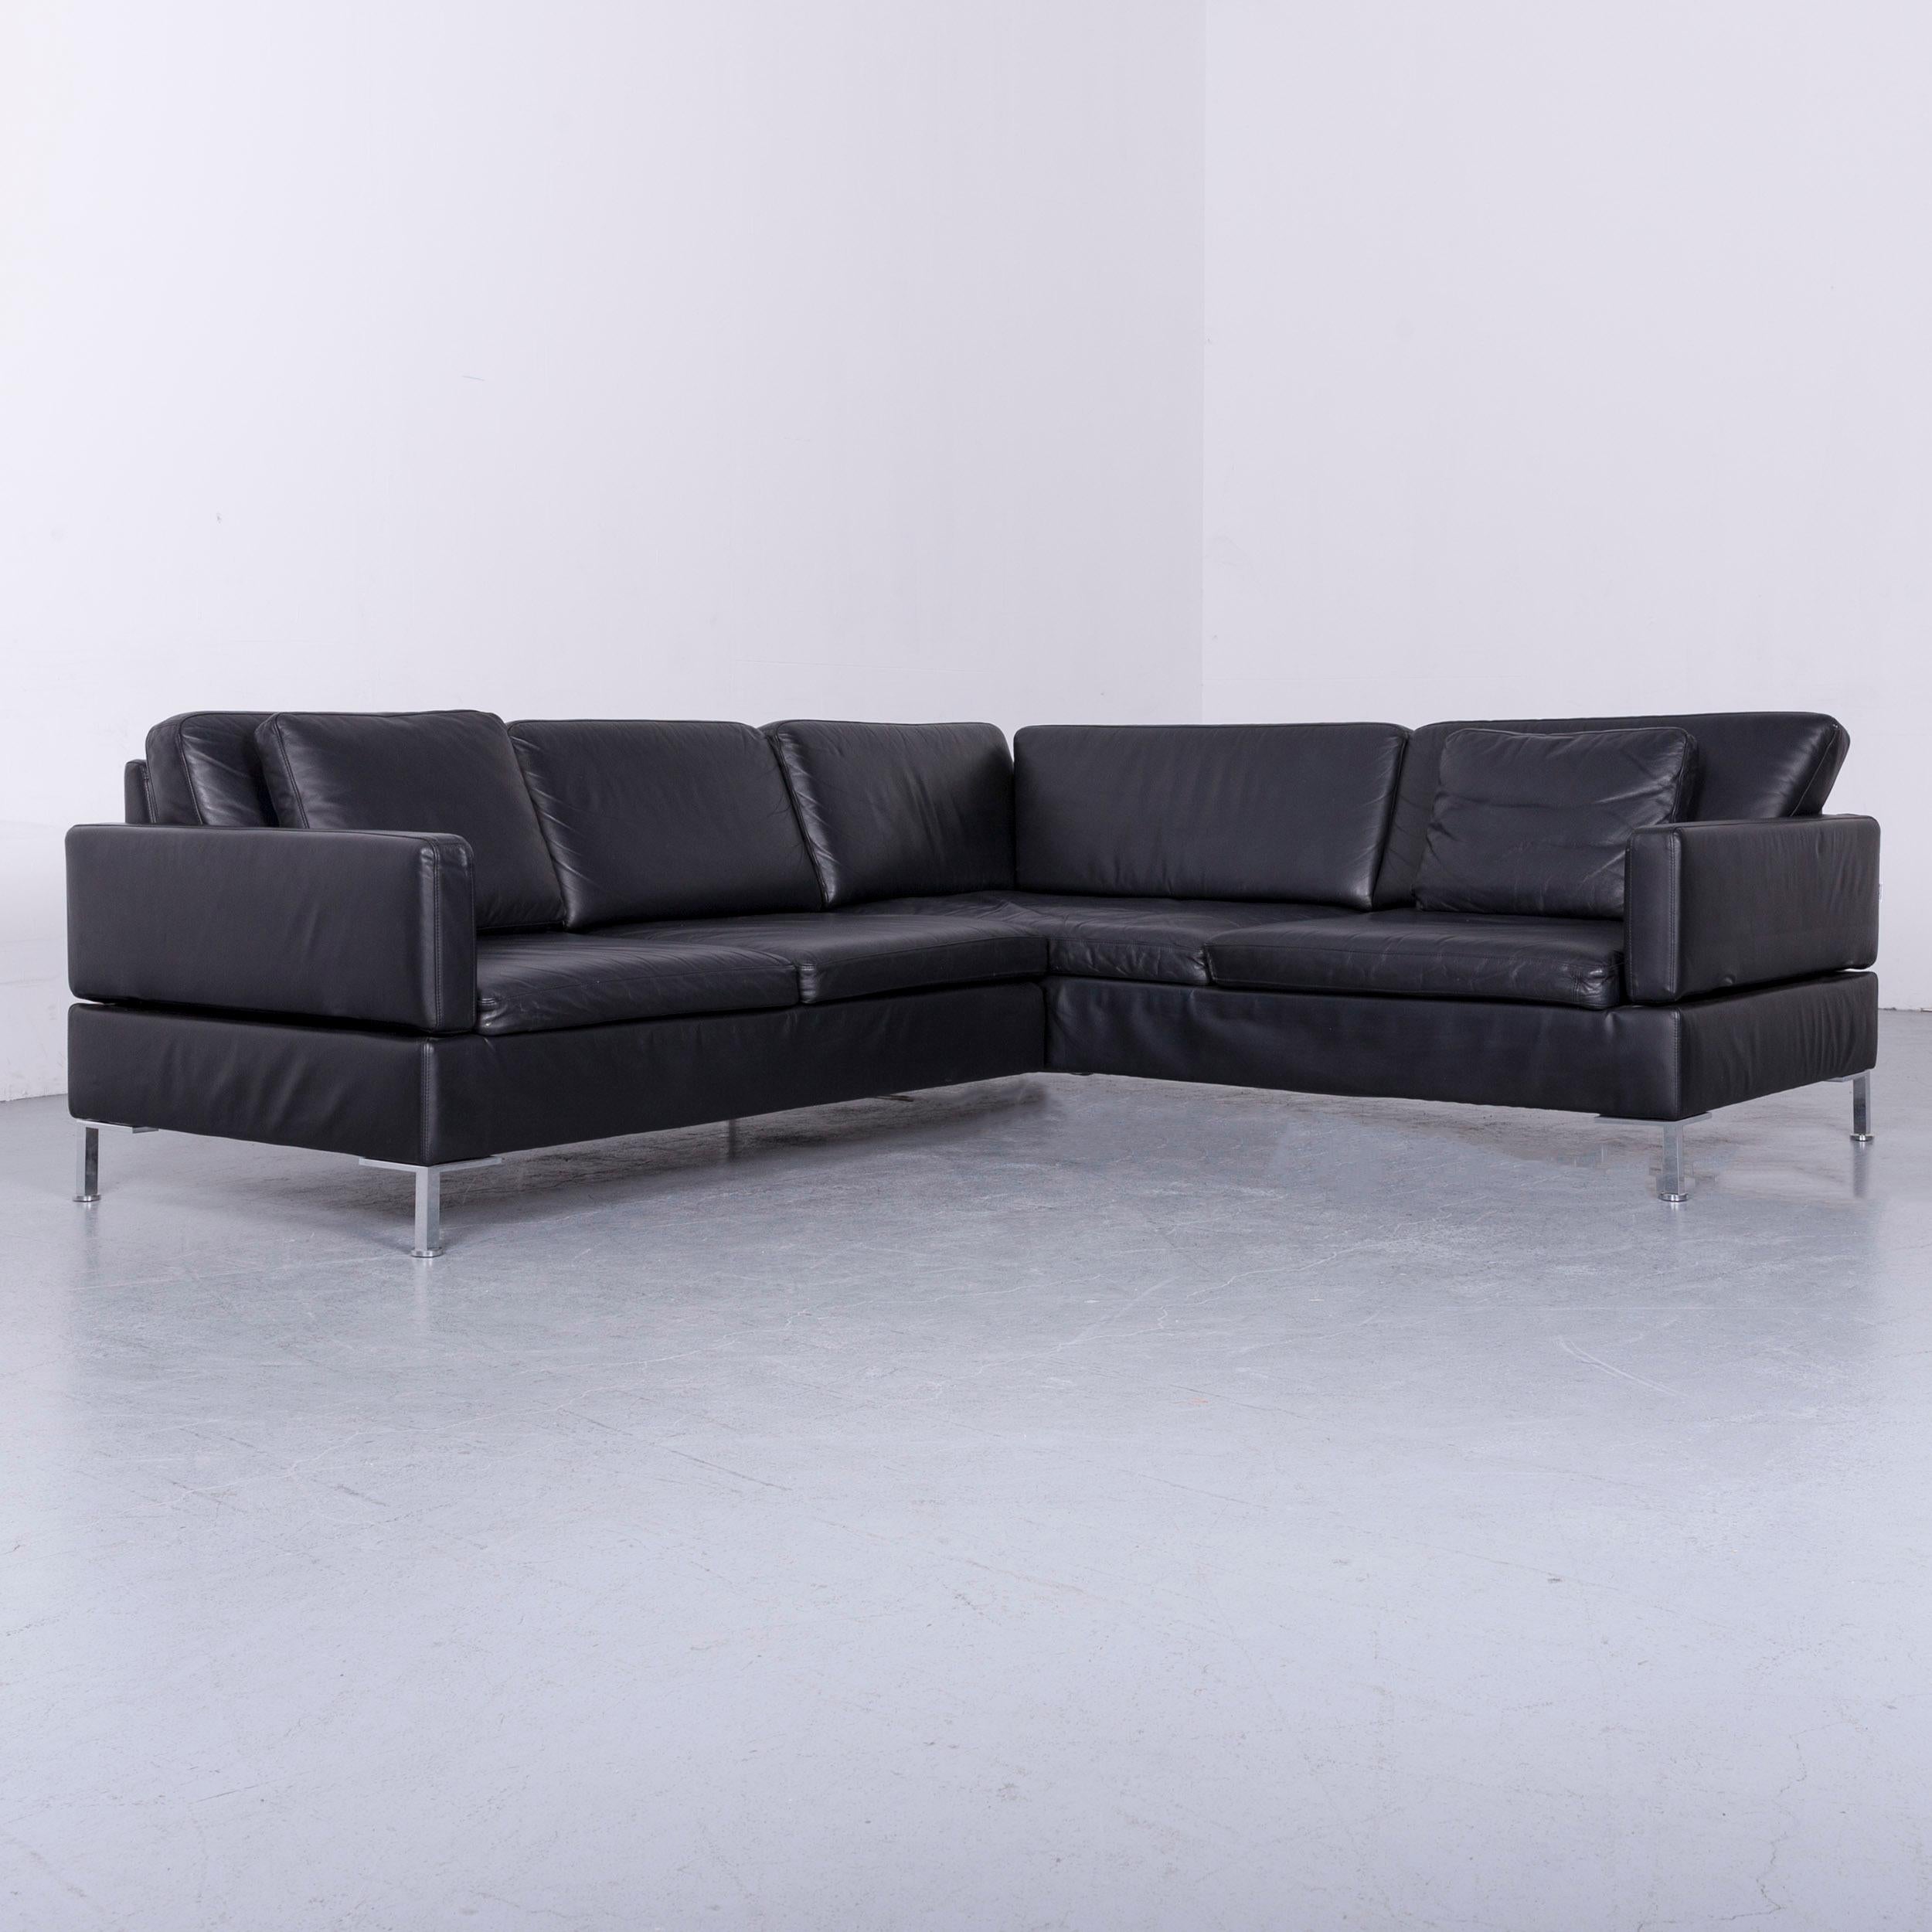 We bring to you an Brühl & Sippold Alba designer corner-sofa black leather couch with function.







.